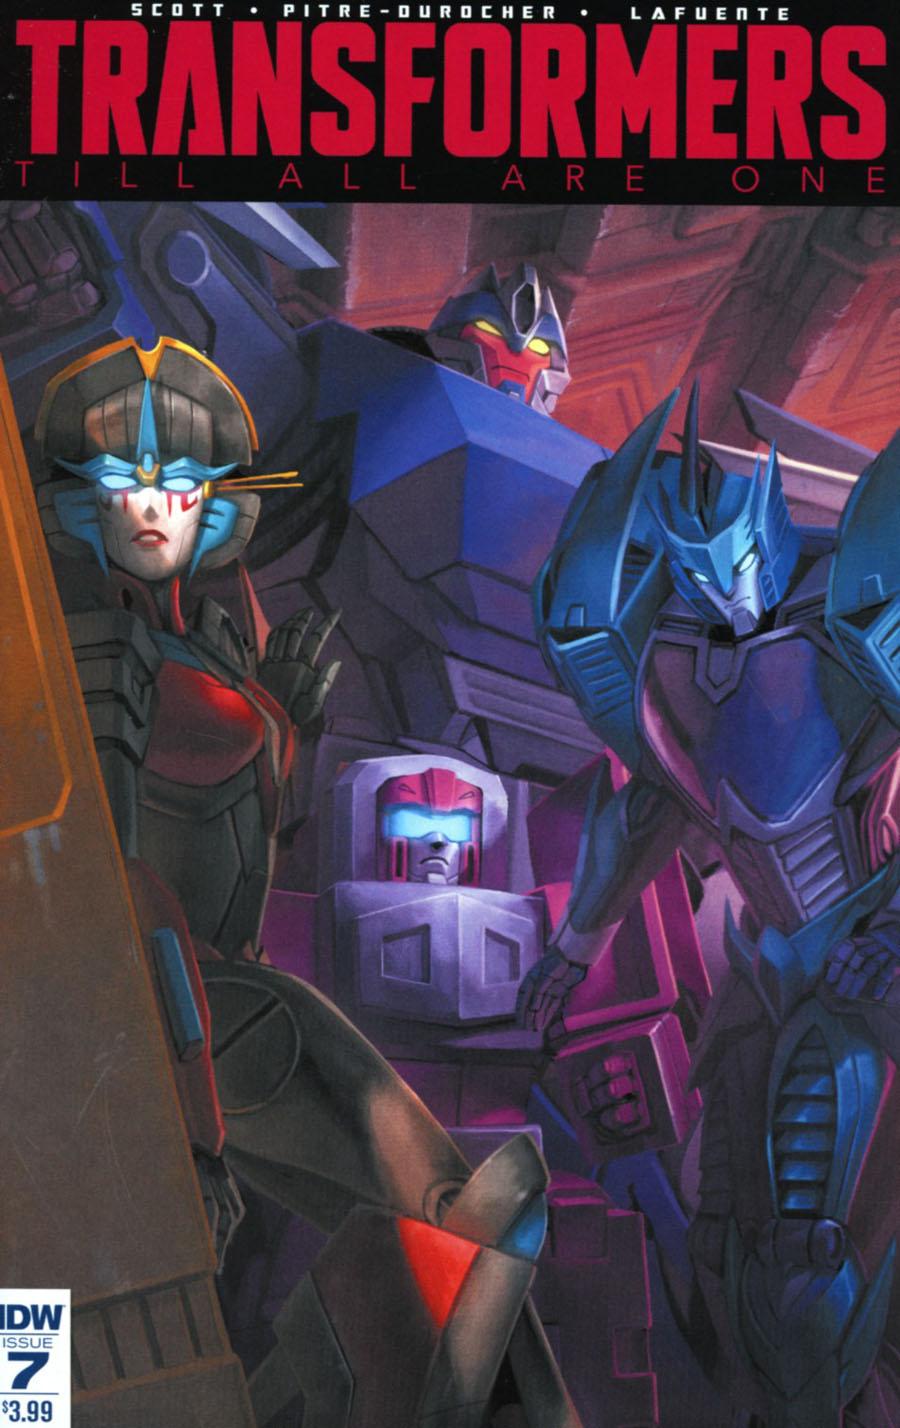 Transformers Till All Are One Vol. 1 #7